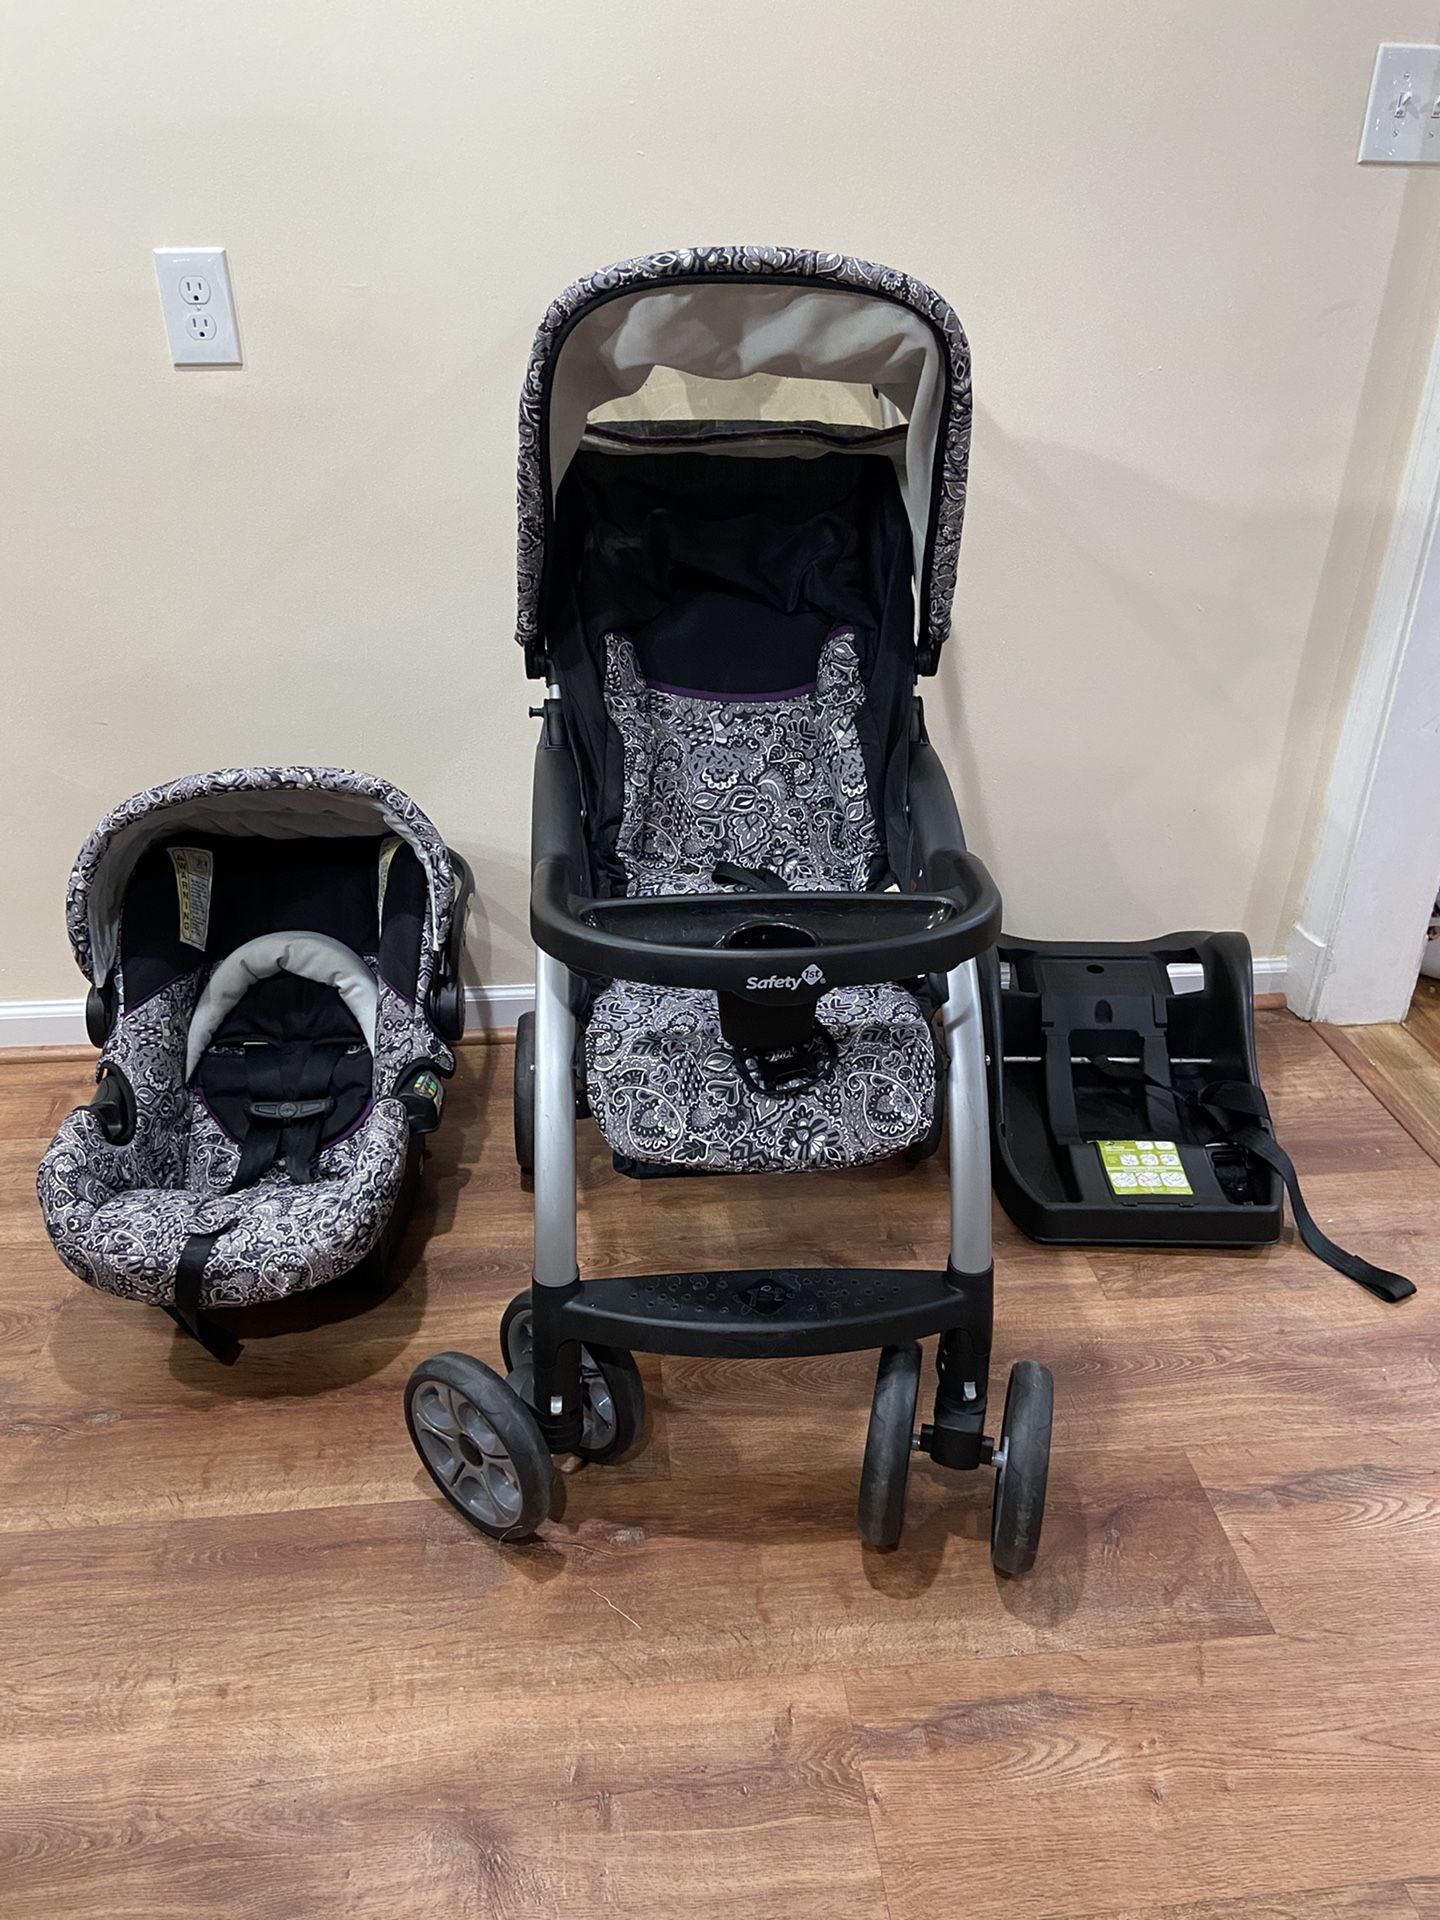 Stroller car seat and base